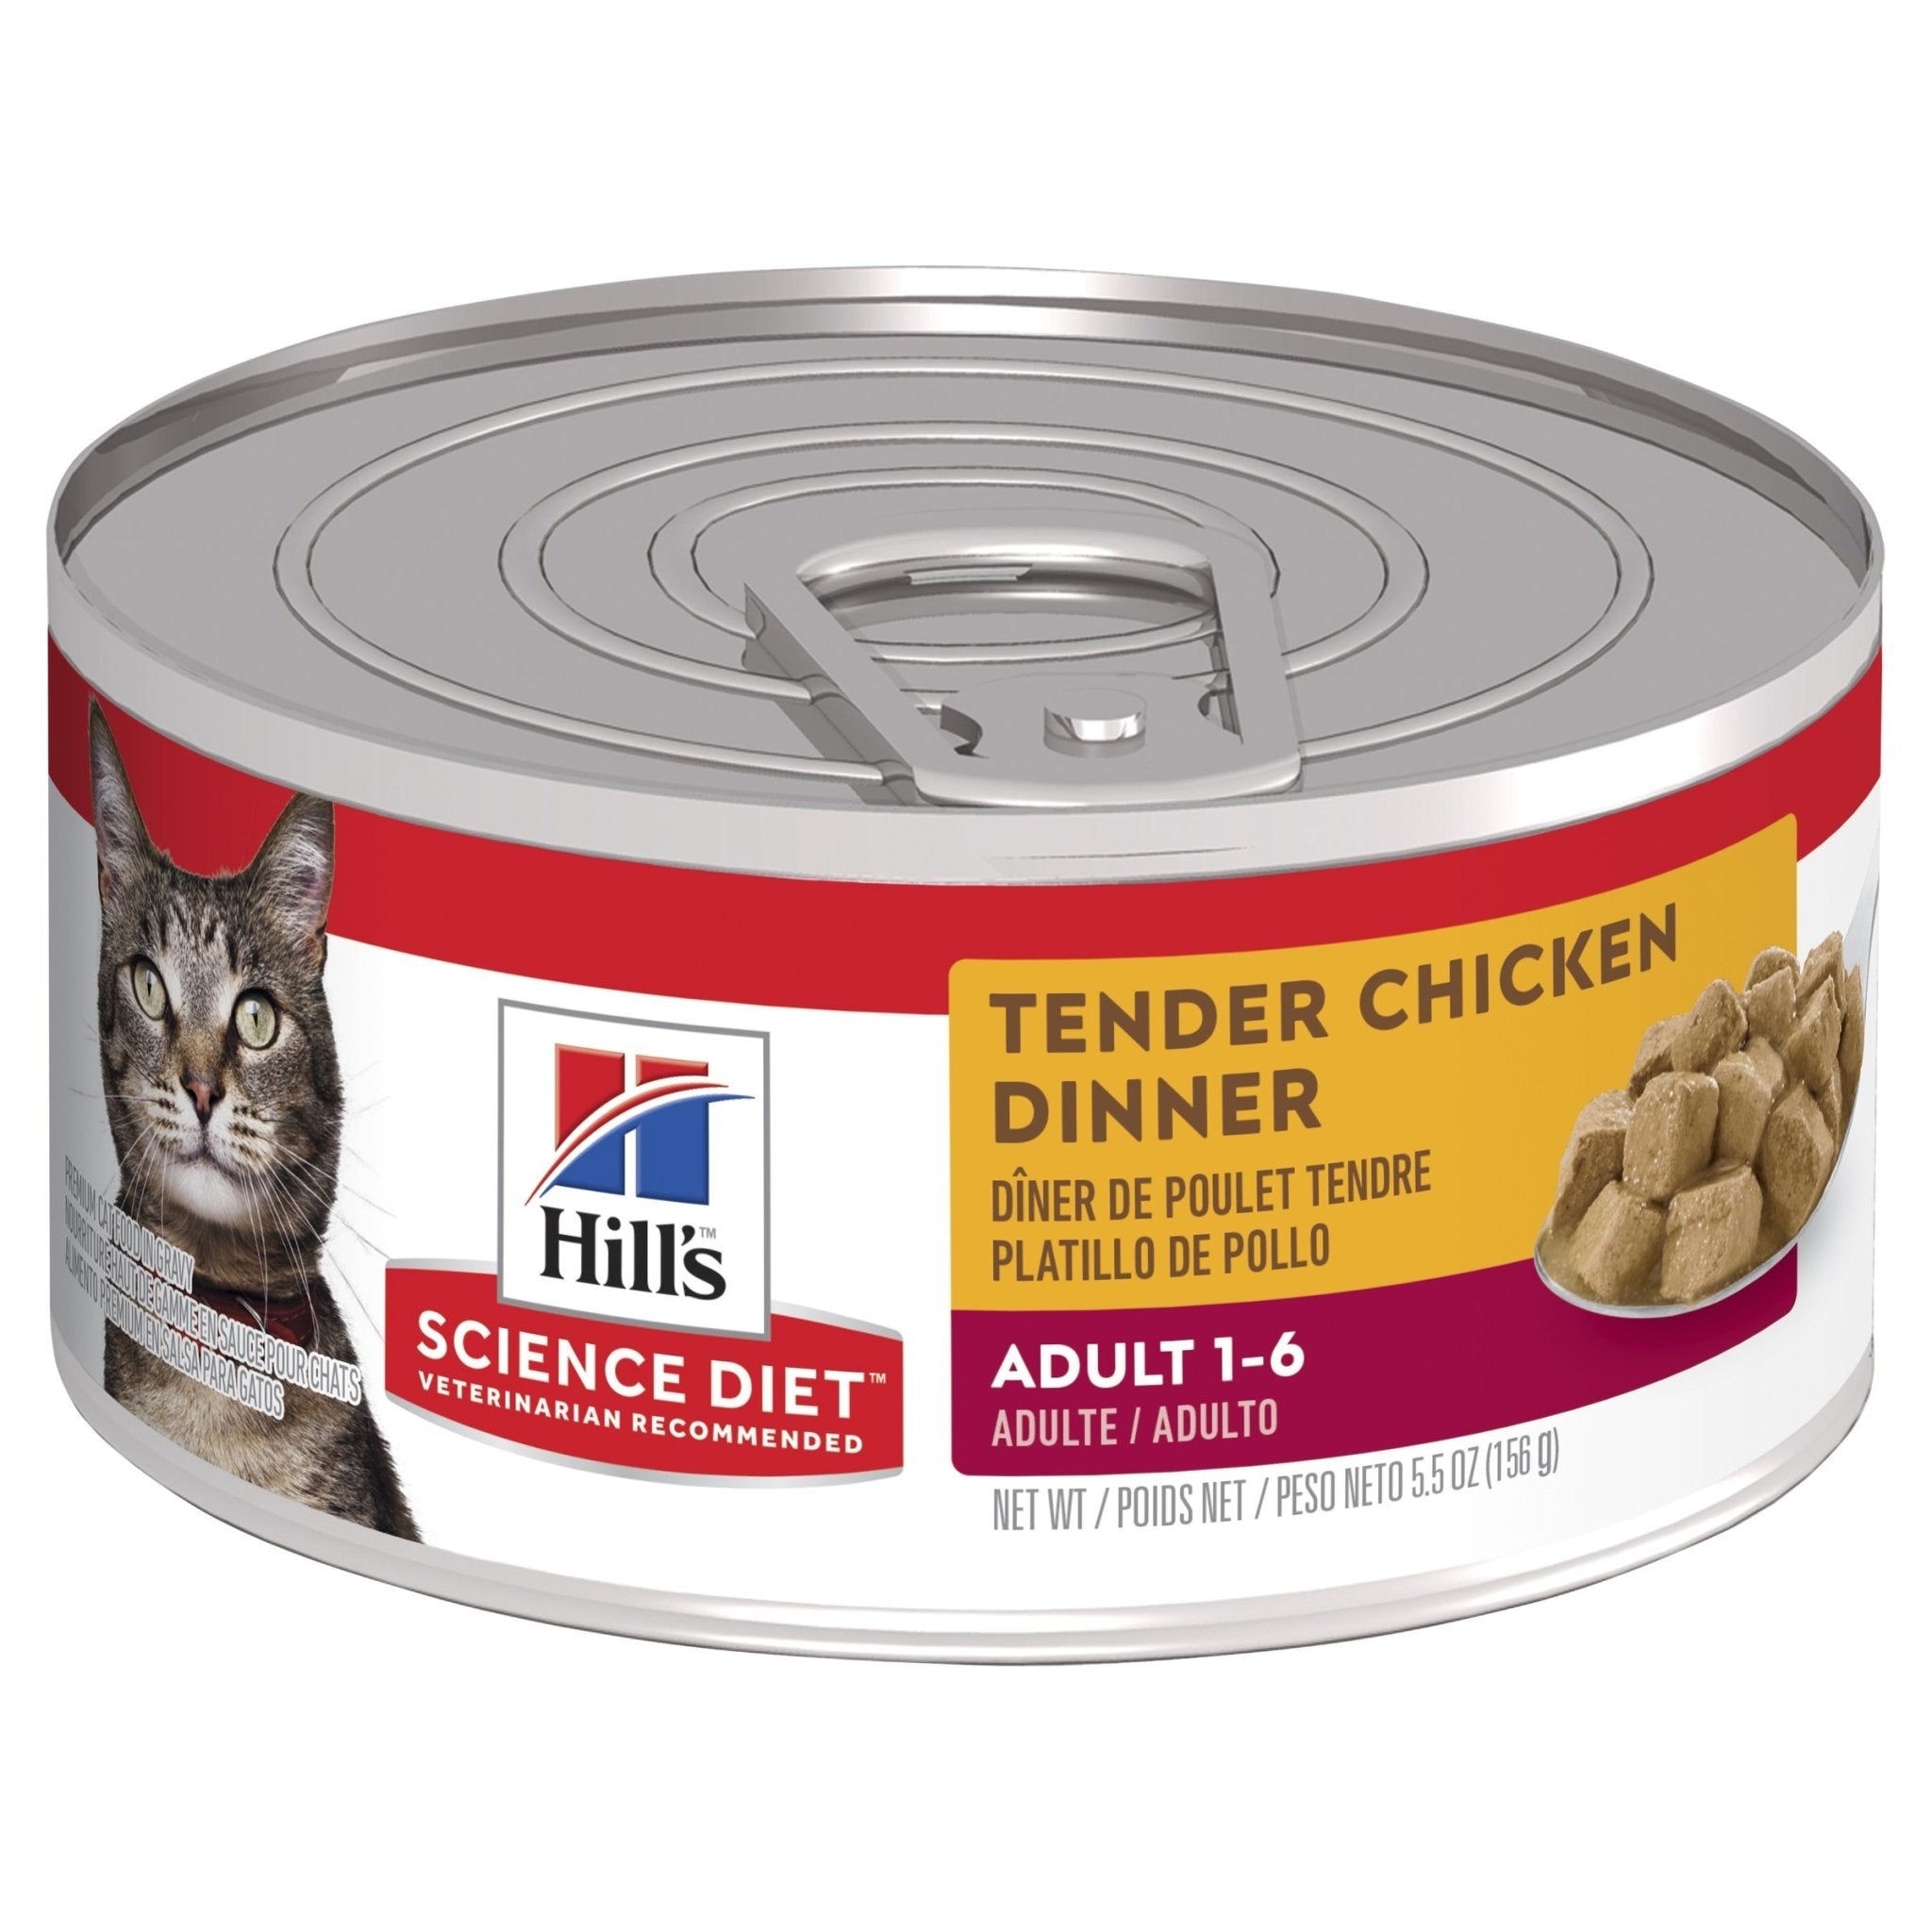 Hill's Science Diet Adult Tender Chicken Dinner Canned Cat Food, 156g, 24 Pack